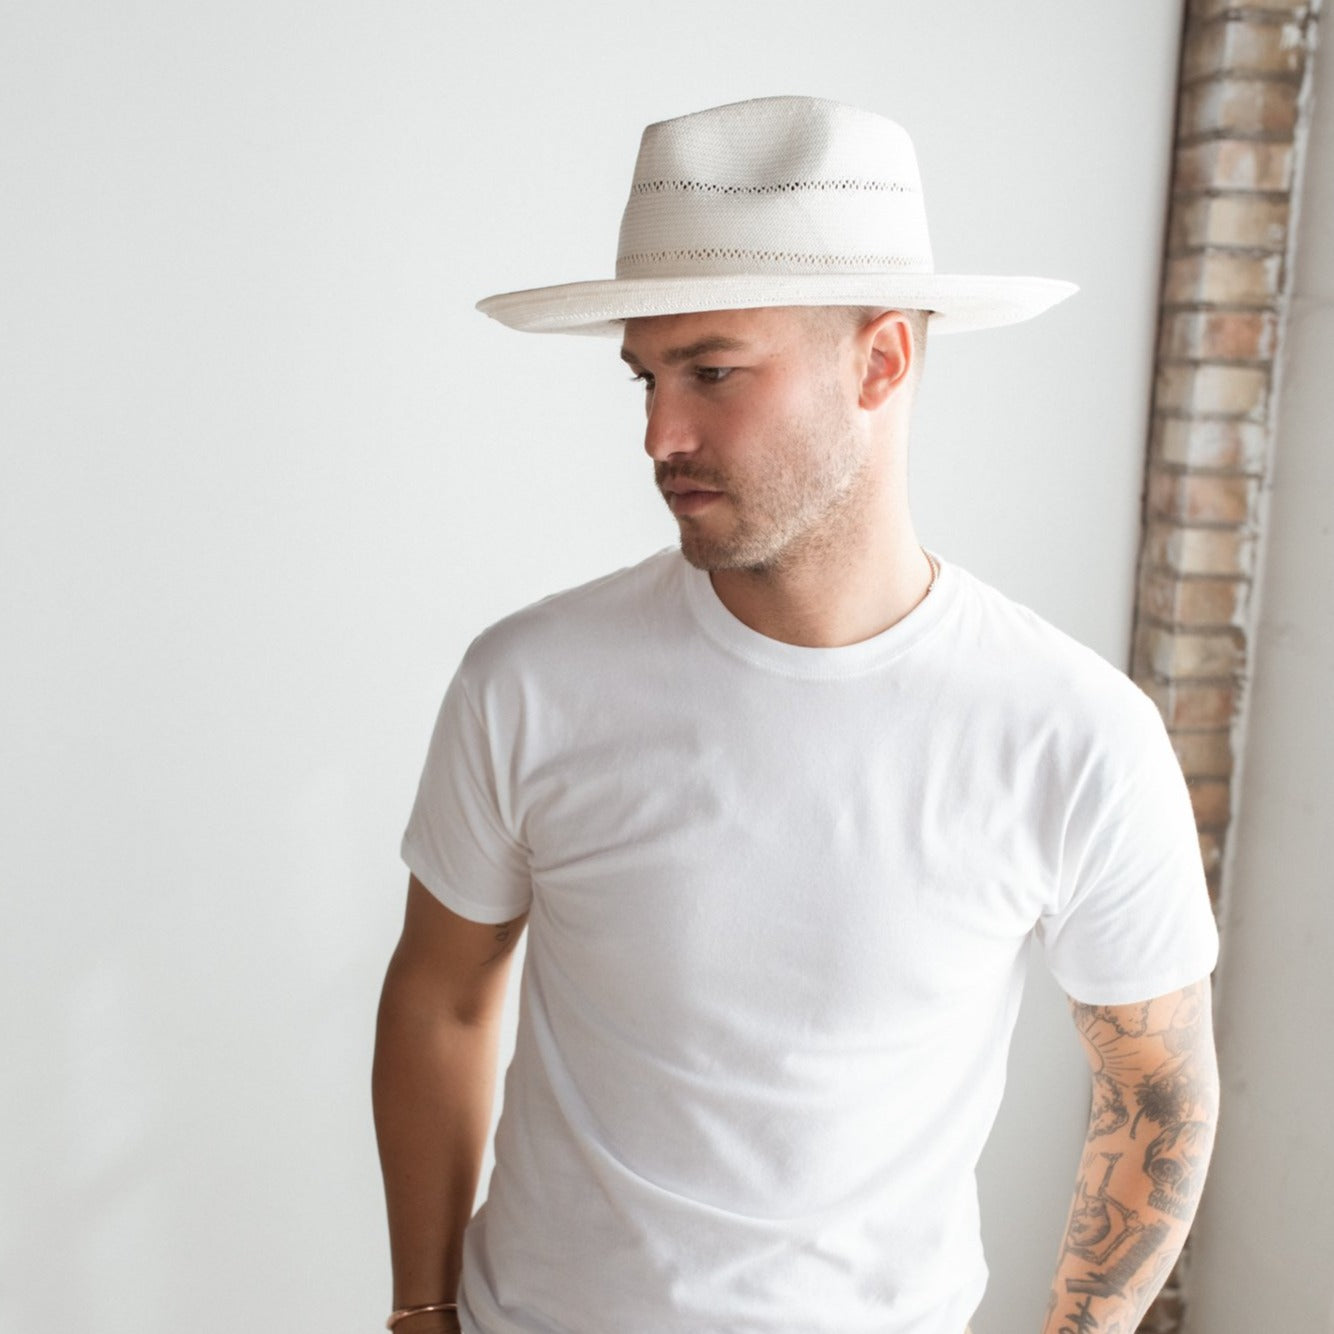 Wide Selection of Men's Wide Brim Hats at Two Roads Hat Co.